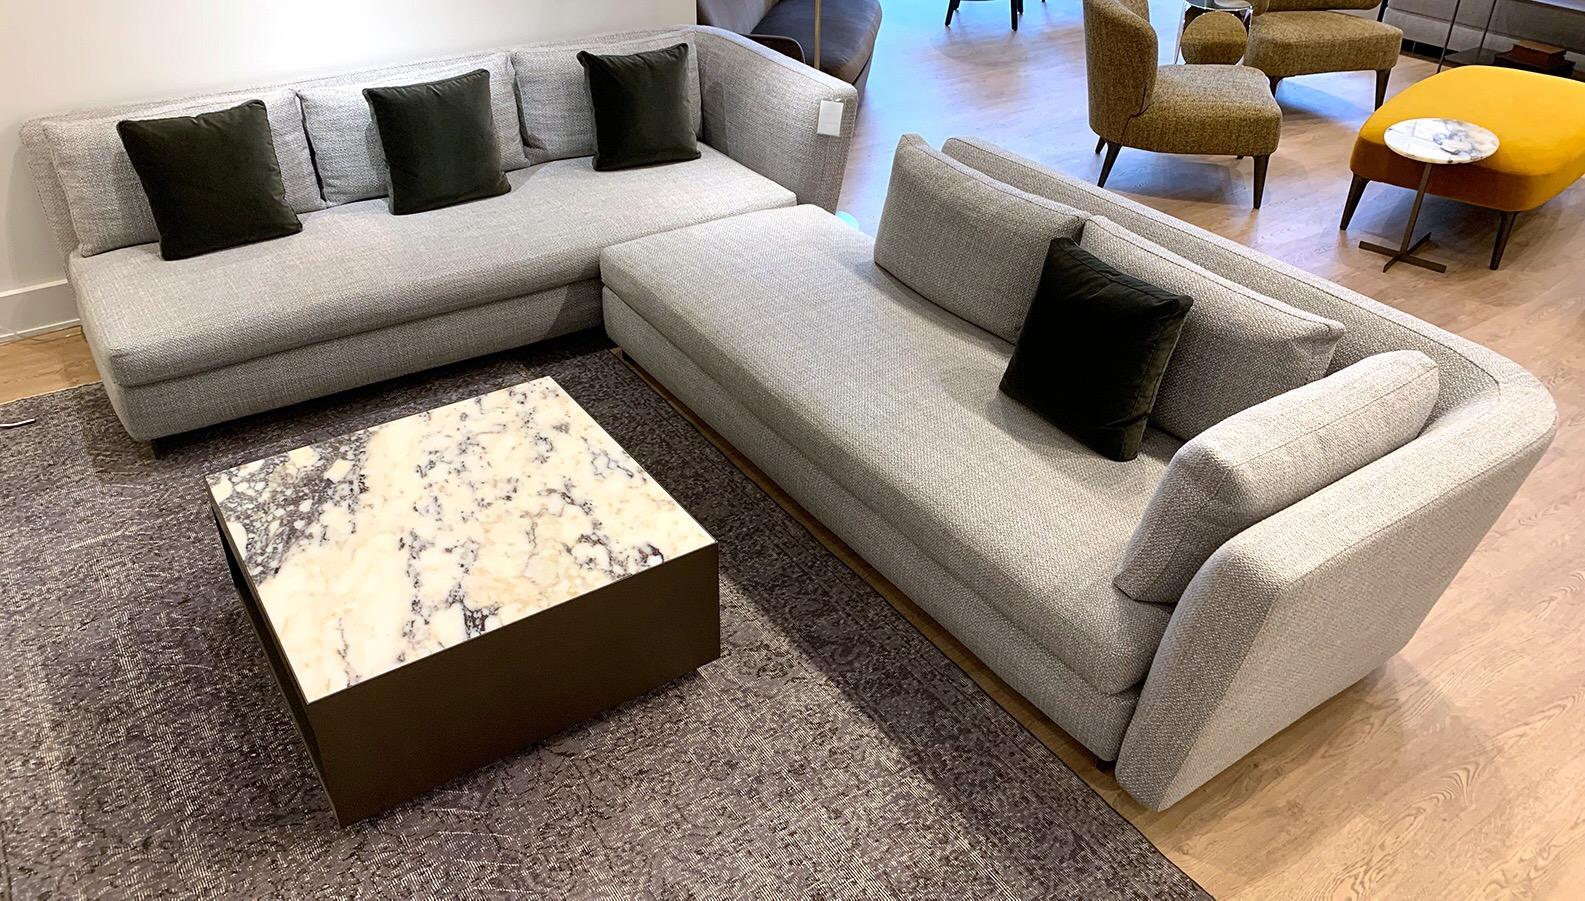 Comprised of 2 pieces, this Seymour sectional is upholstered in light gray fabric (cover removable). Includes 4 small black velvet cushions and 6 large back cushions. Designed by Rodolfo Dordoni for Minotti. Can be configured in 2 different ways.